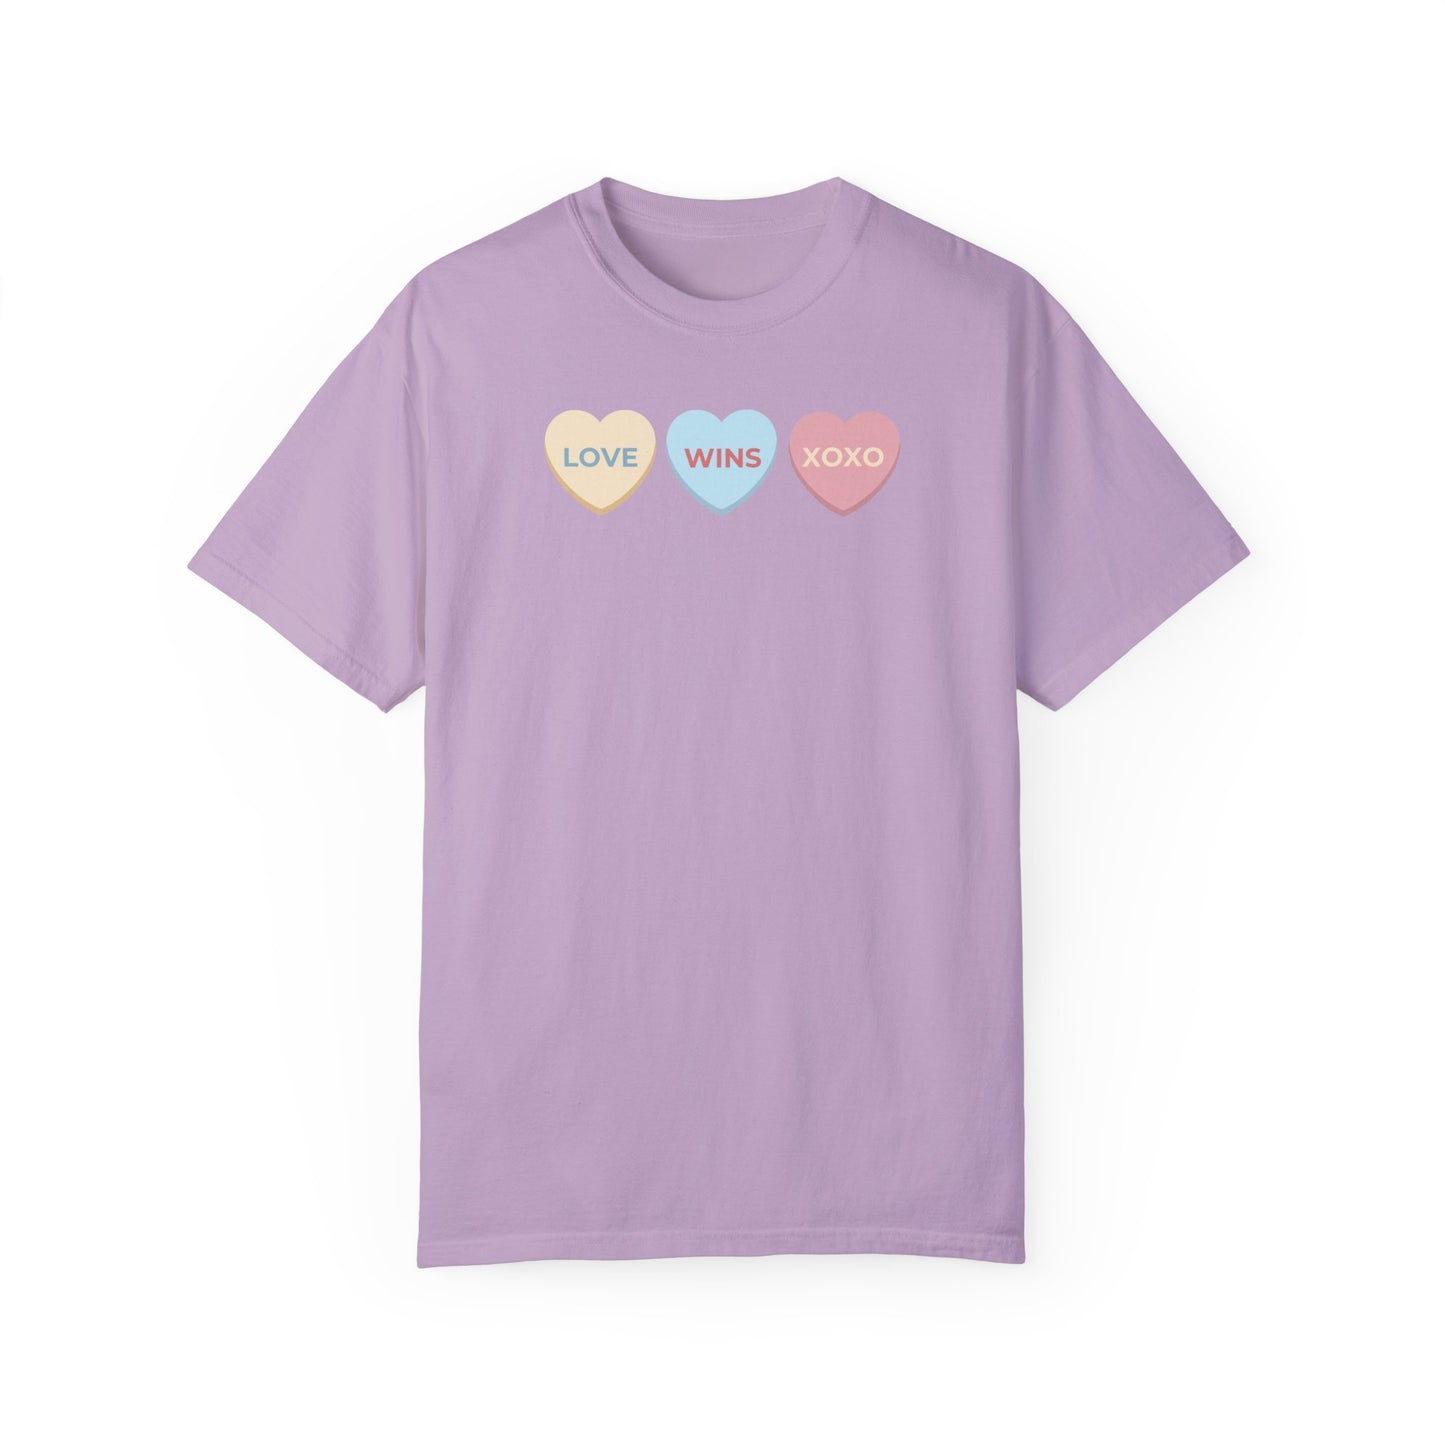 Love Wins Always T-Shirt XOXO Love You Hearts Candy Shirt Oversize Shirt Teen Preppy Cute Tee Valentine's Day Gift for Her Best Friend Mom